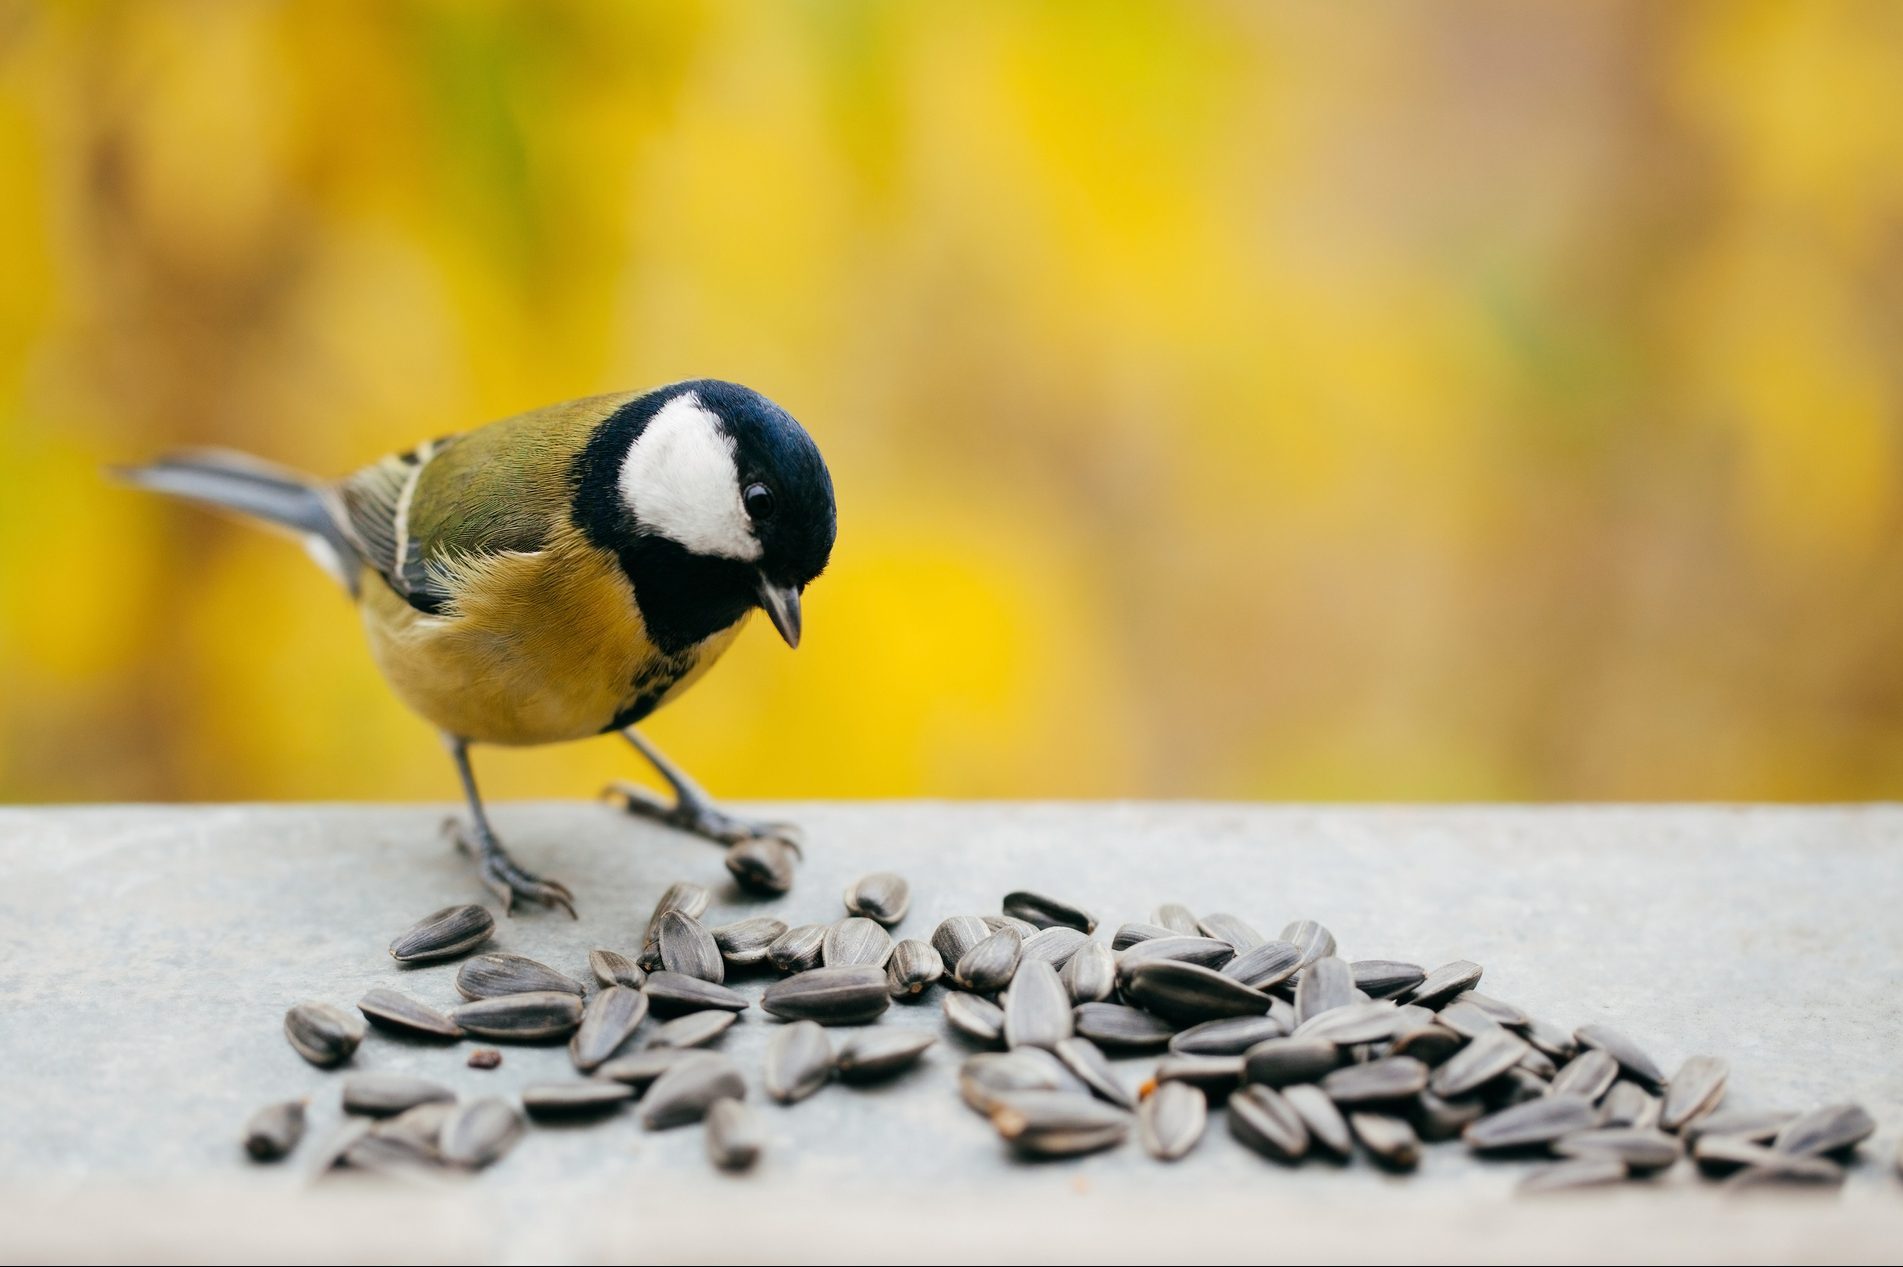 Tomtit eating sunflower seeds with copy space